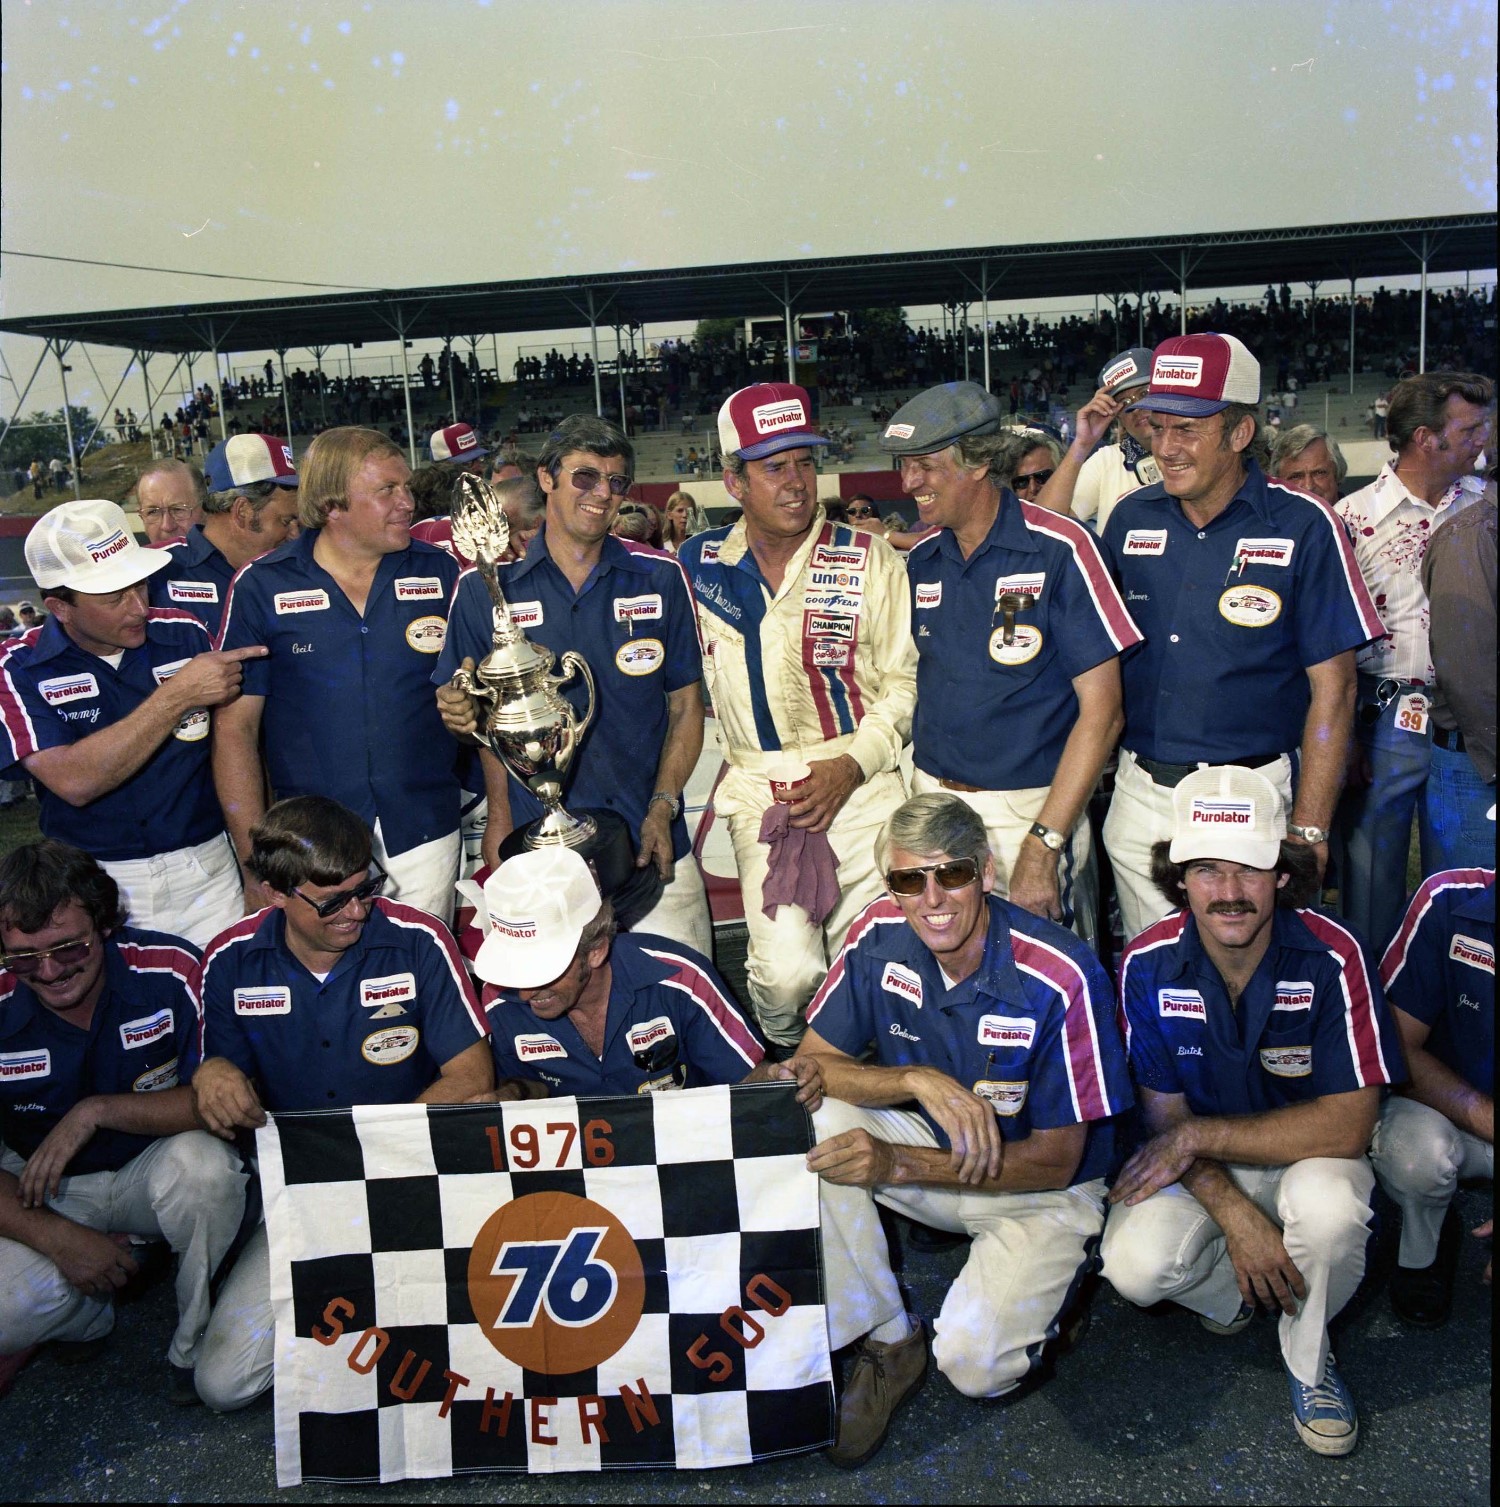 The Wood Brothers and Pearson celebrate their 1976 Southern 500 win